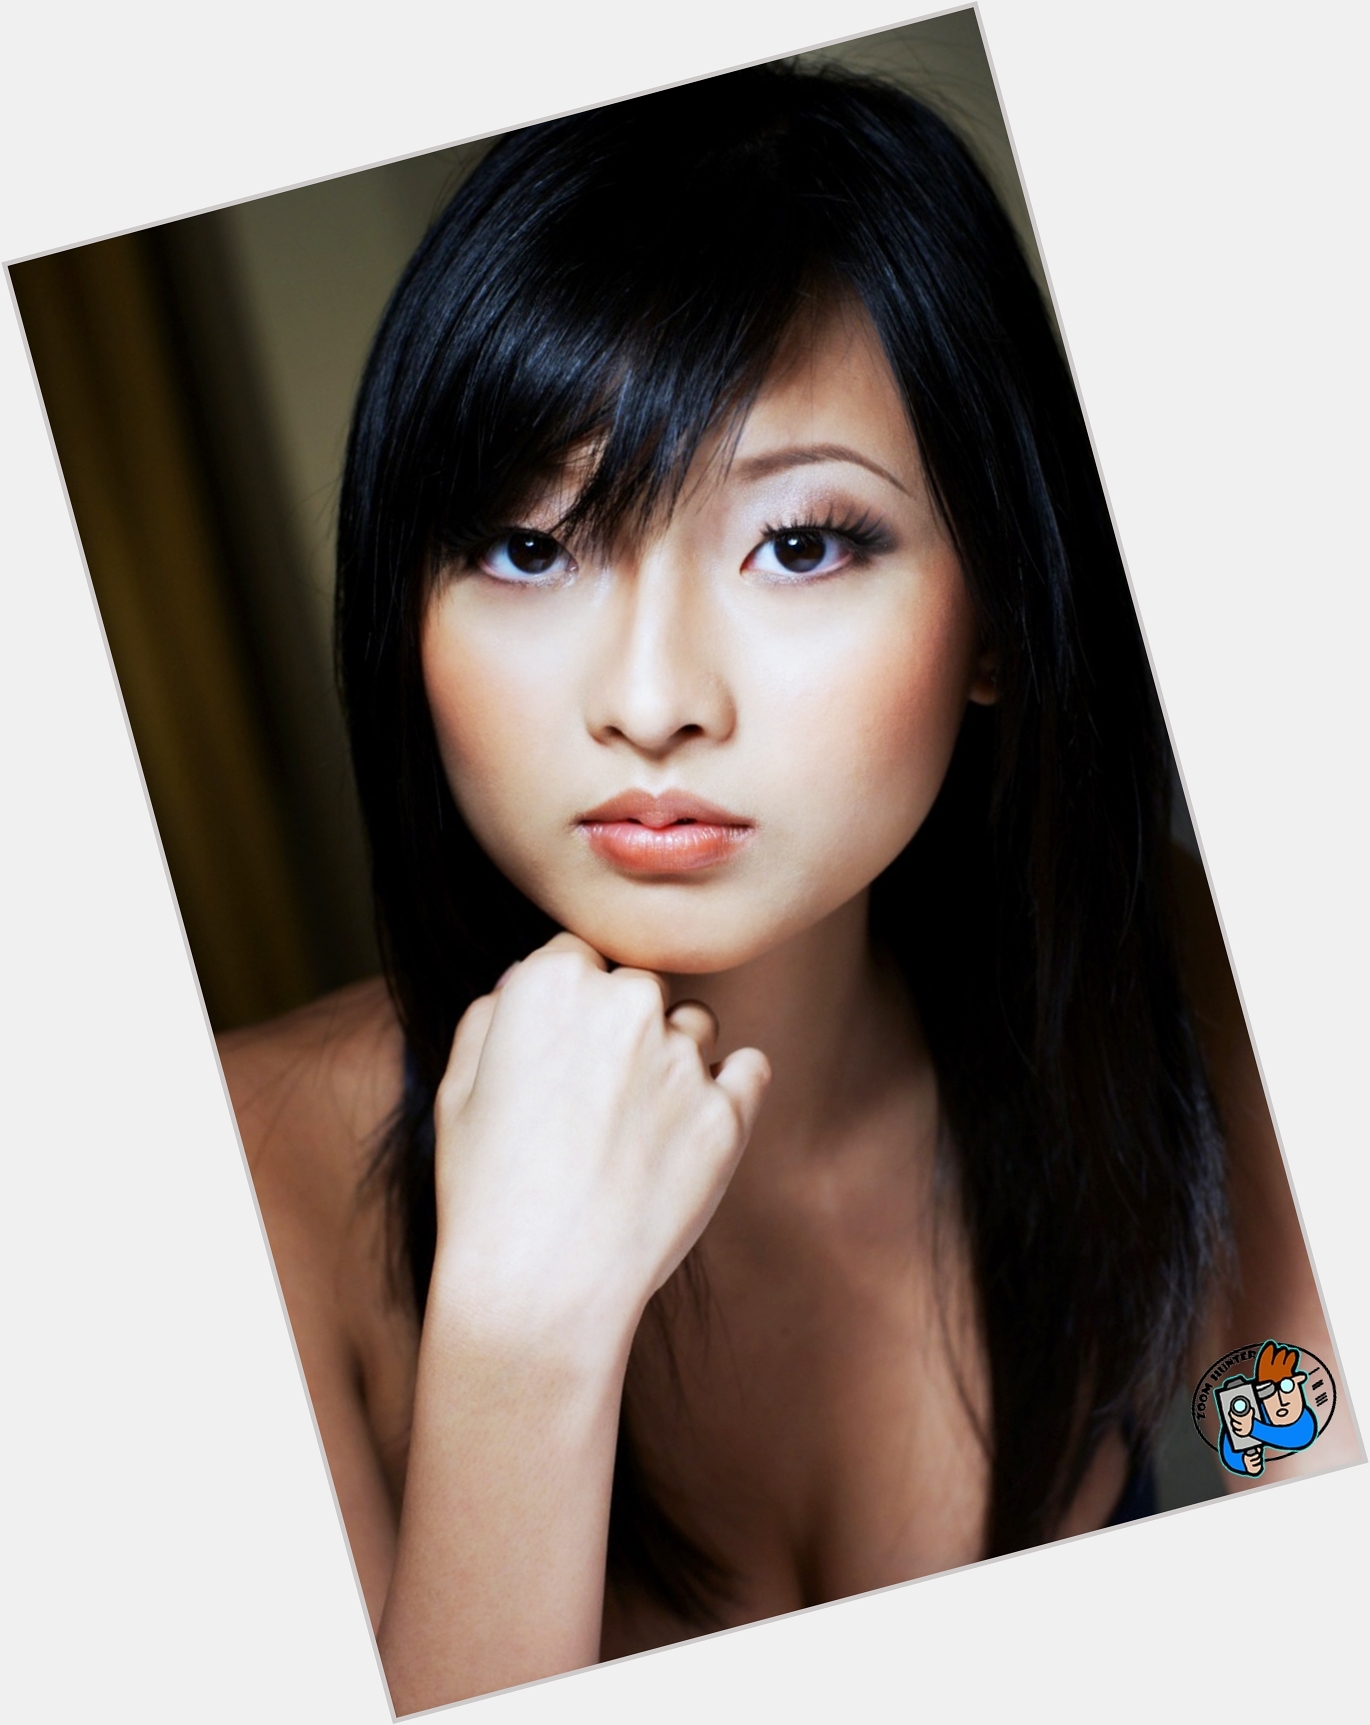 <a href="/hot-women/jamie-ang/is-she-our-angel">Jamie Ang</a> Slim body,  black hair & hairstyles